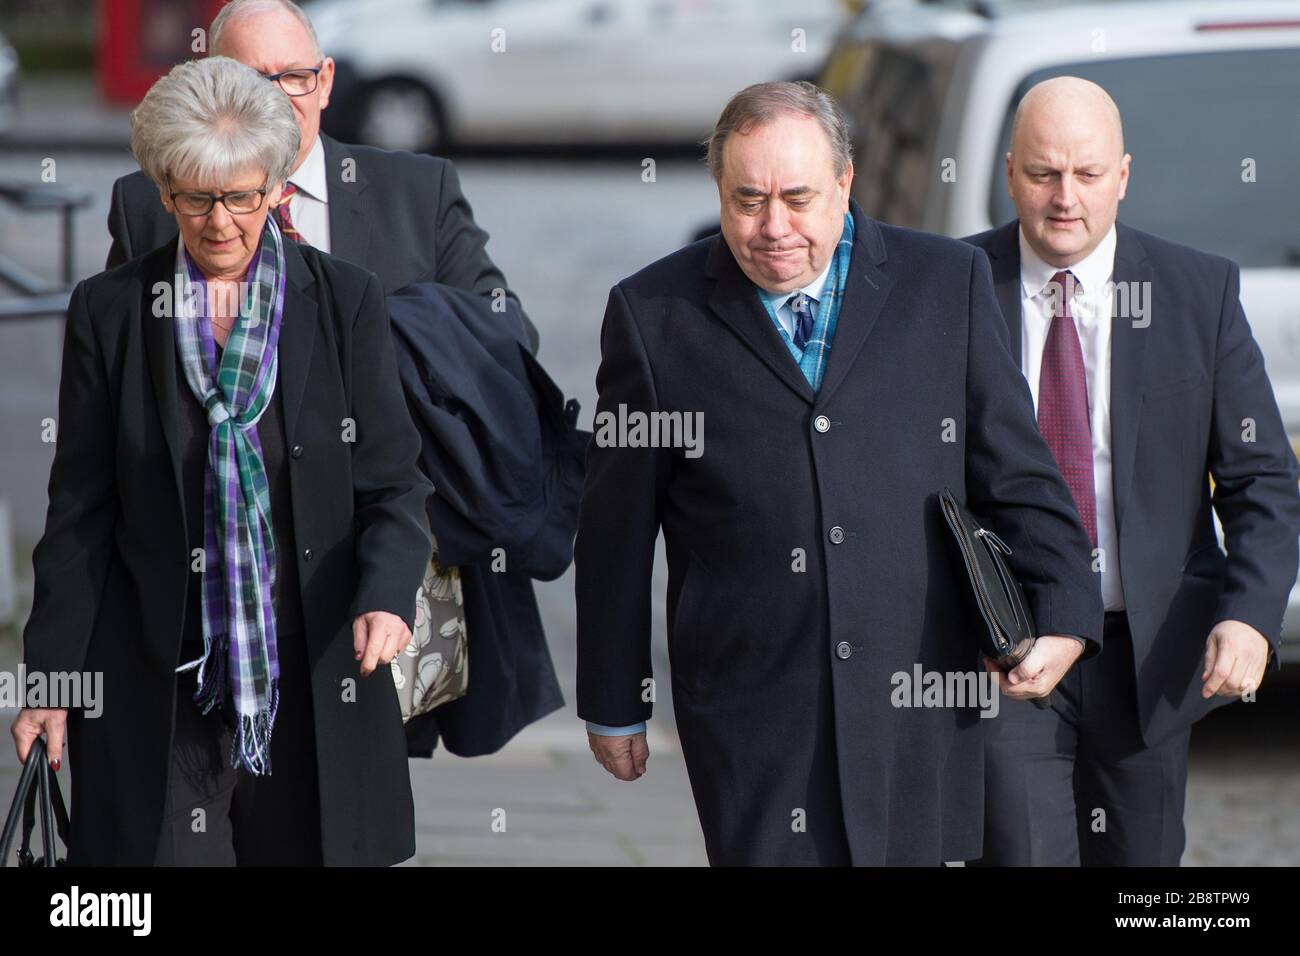 Edinburgh, UK. 23rd Mar, 2020. Pictured: Alex Salmond - Former First Minister of Scotland and Former Leader of the Scottish National Party (SNP). Alex Salmond is seen arriving at the High Court on day eleven of his trial, where the Jury are expected to return a verdict later today. Credit: Colin Fisher/Alamy Live News Stock Photo